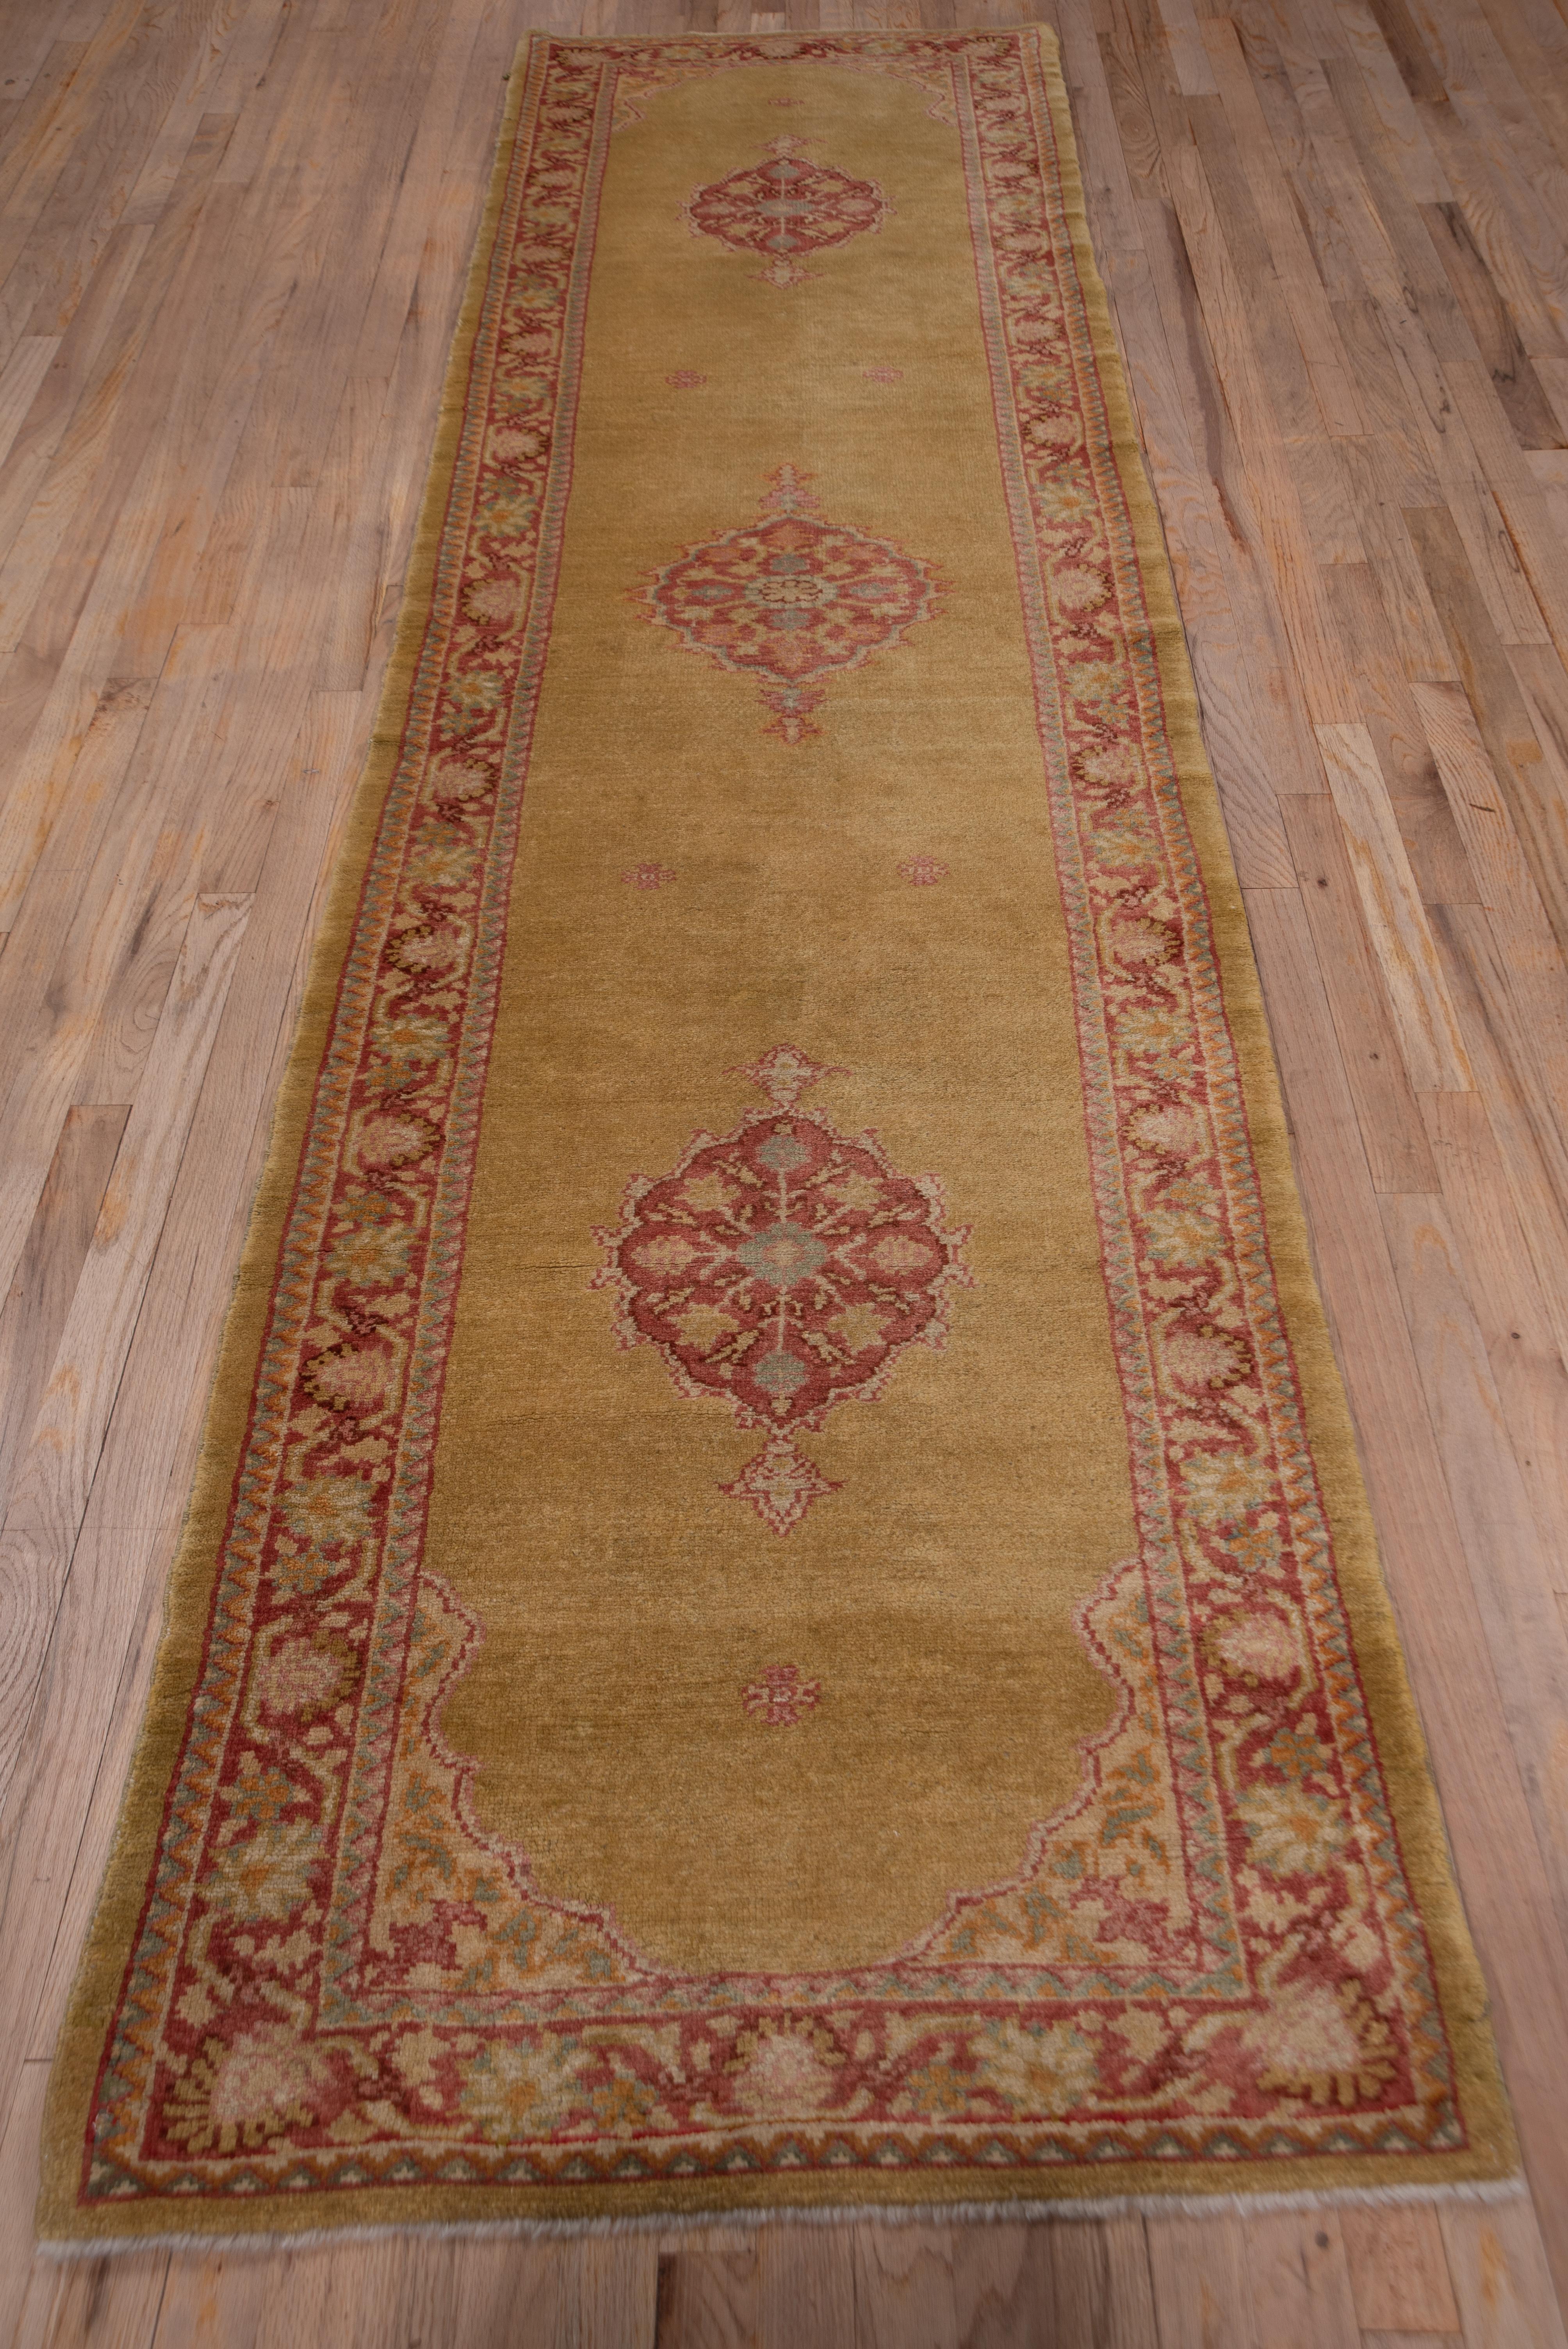 This solidly woven Turkish runner has a mustard gold field displaying three widely spaced small, scalloped, pendanted medallion. The red-brown min border features a palmette meander. The condition is generally very good, if not excellent., and the